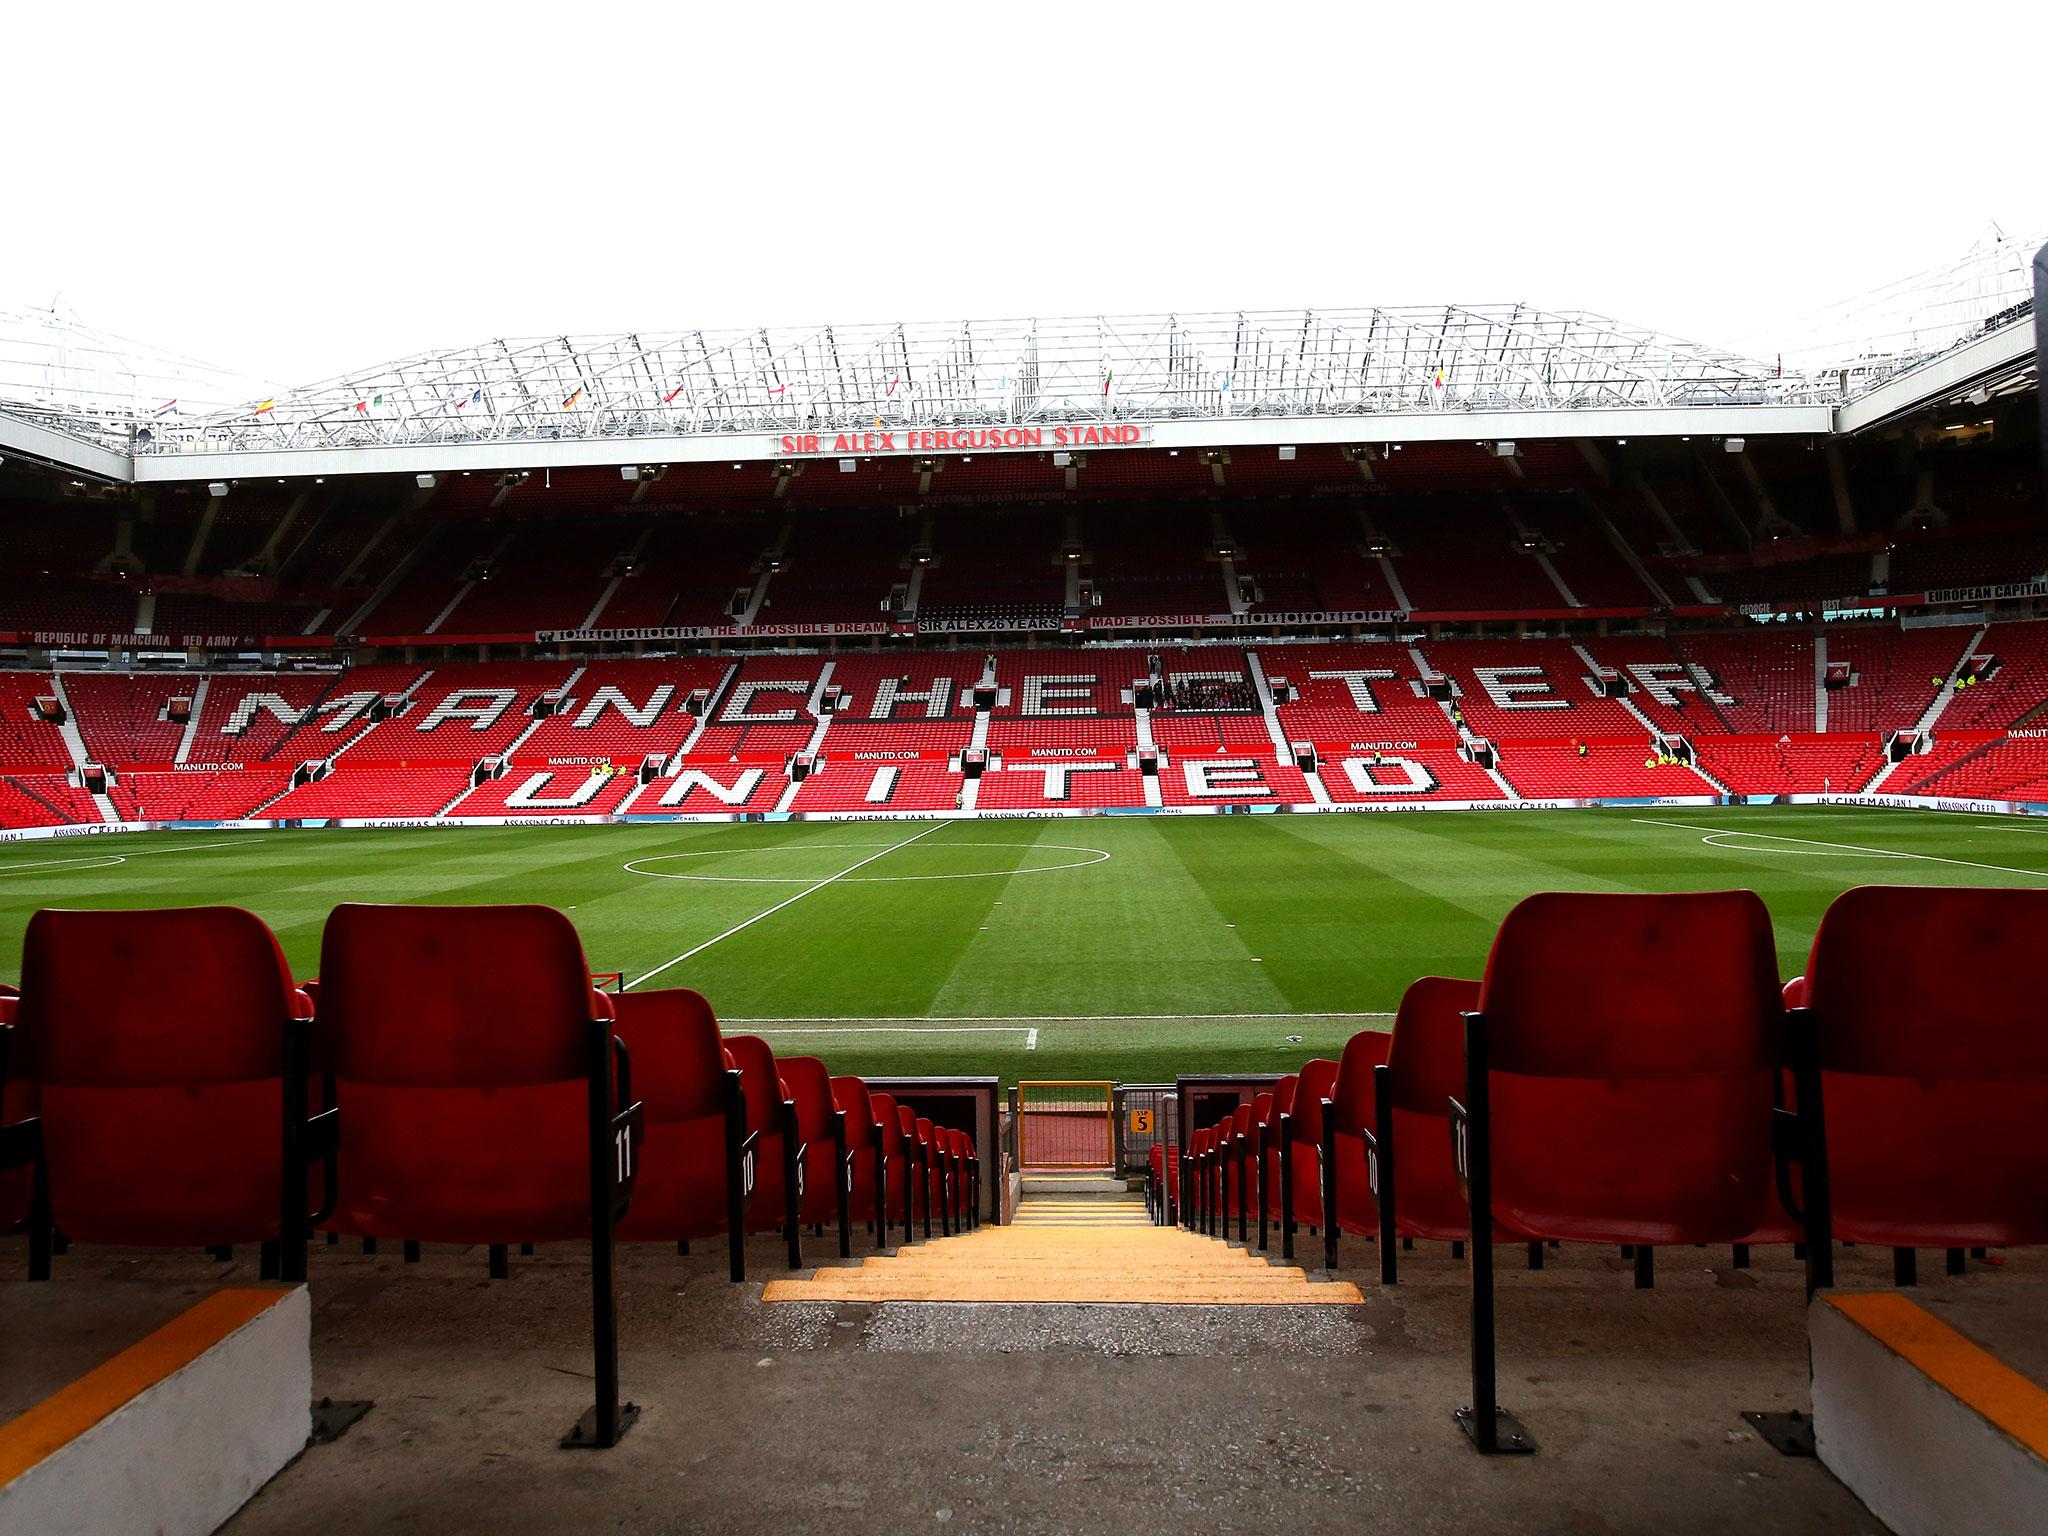 Manchester United's plans for extra disabled viewing areas triggered the offensive posts on Twitter